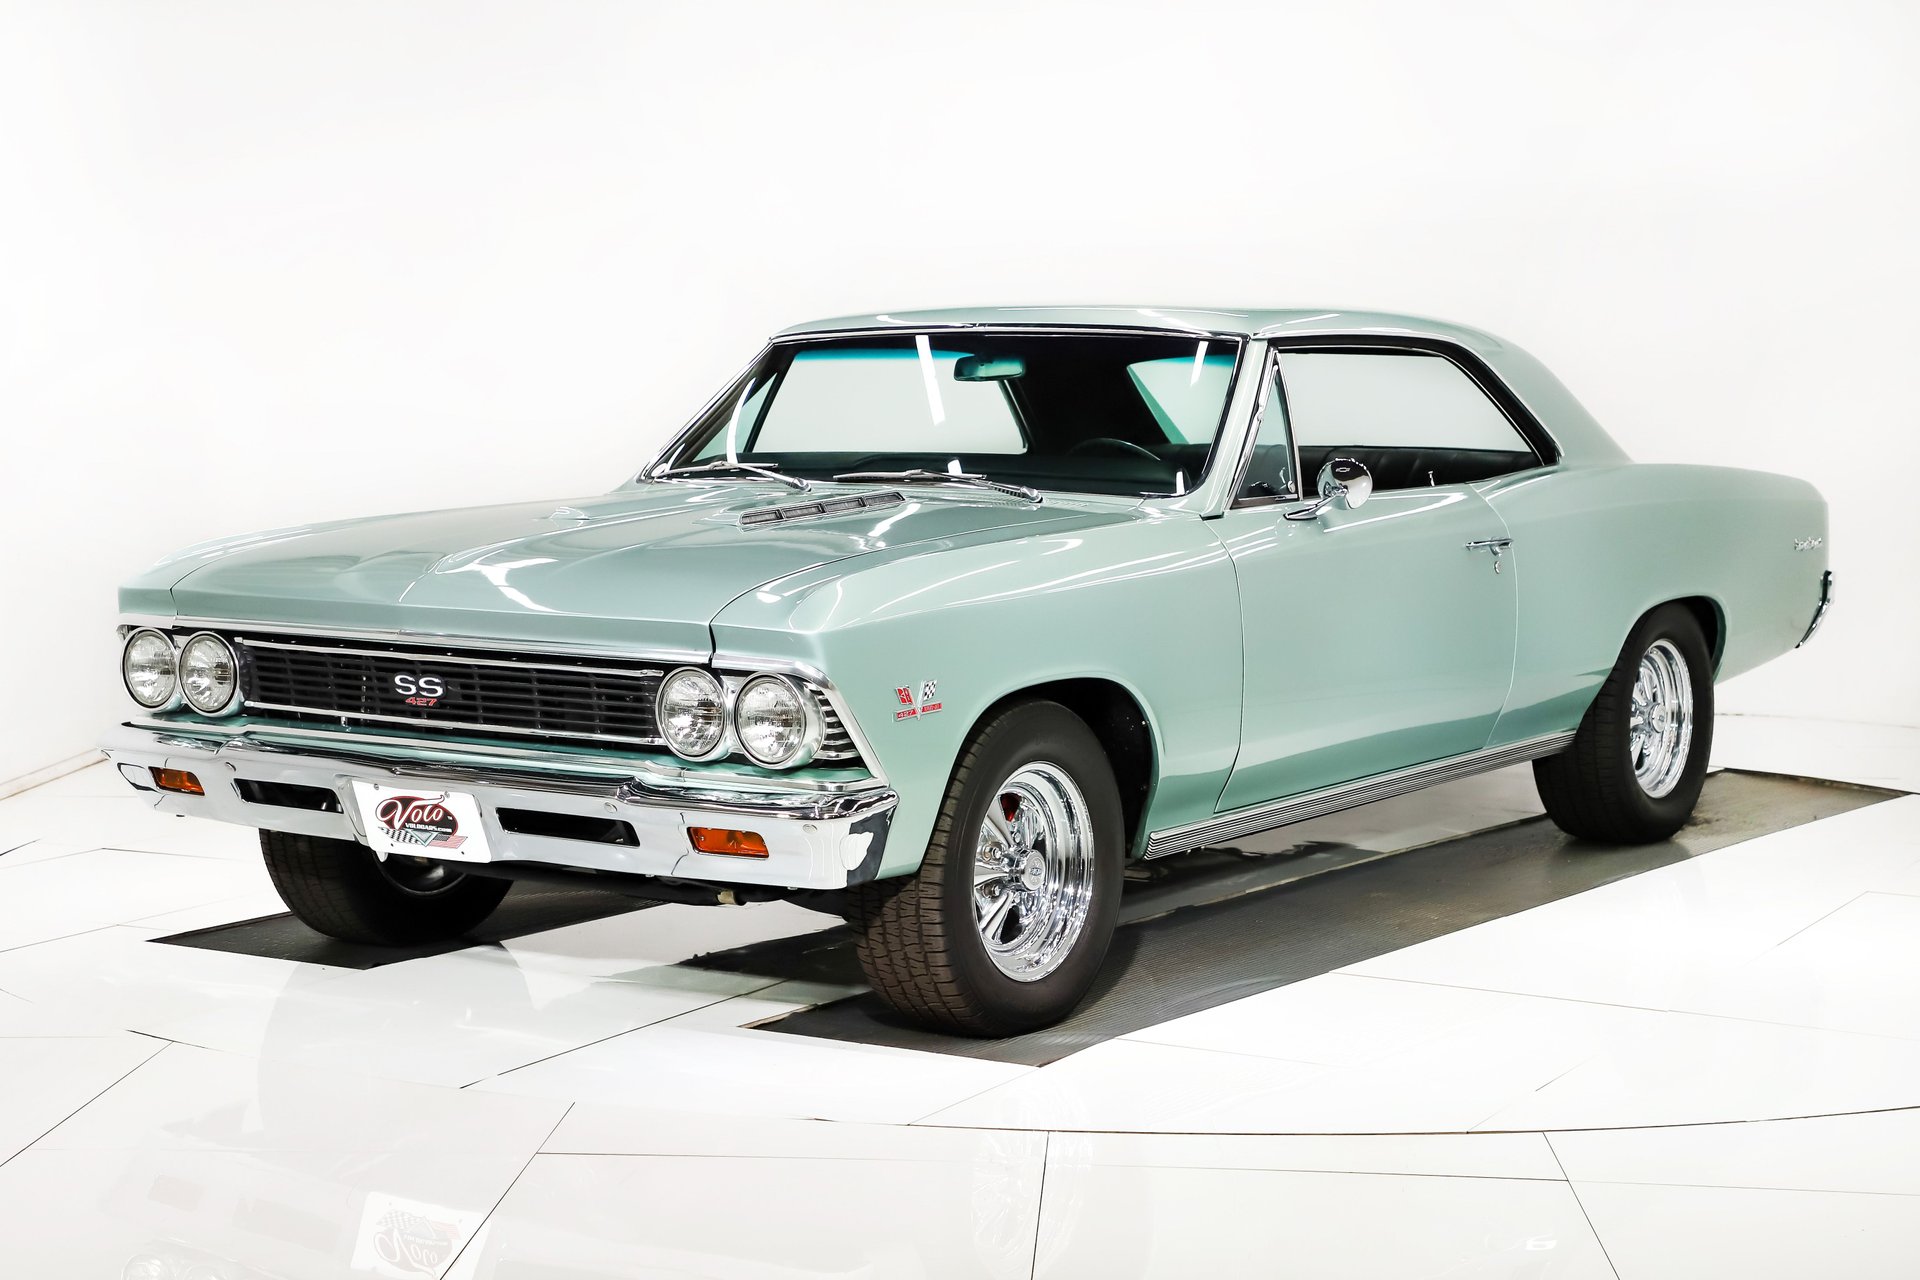 Classic Muscle Cars: The 1966 Chevrolet Chevelle